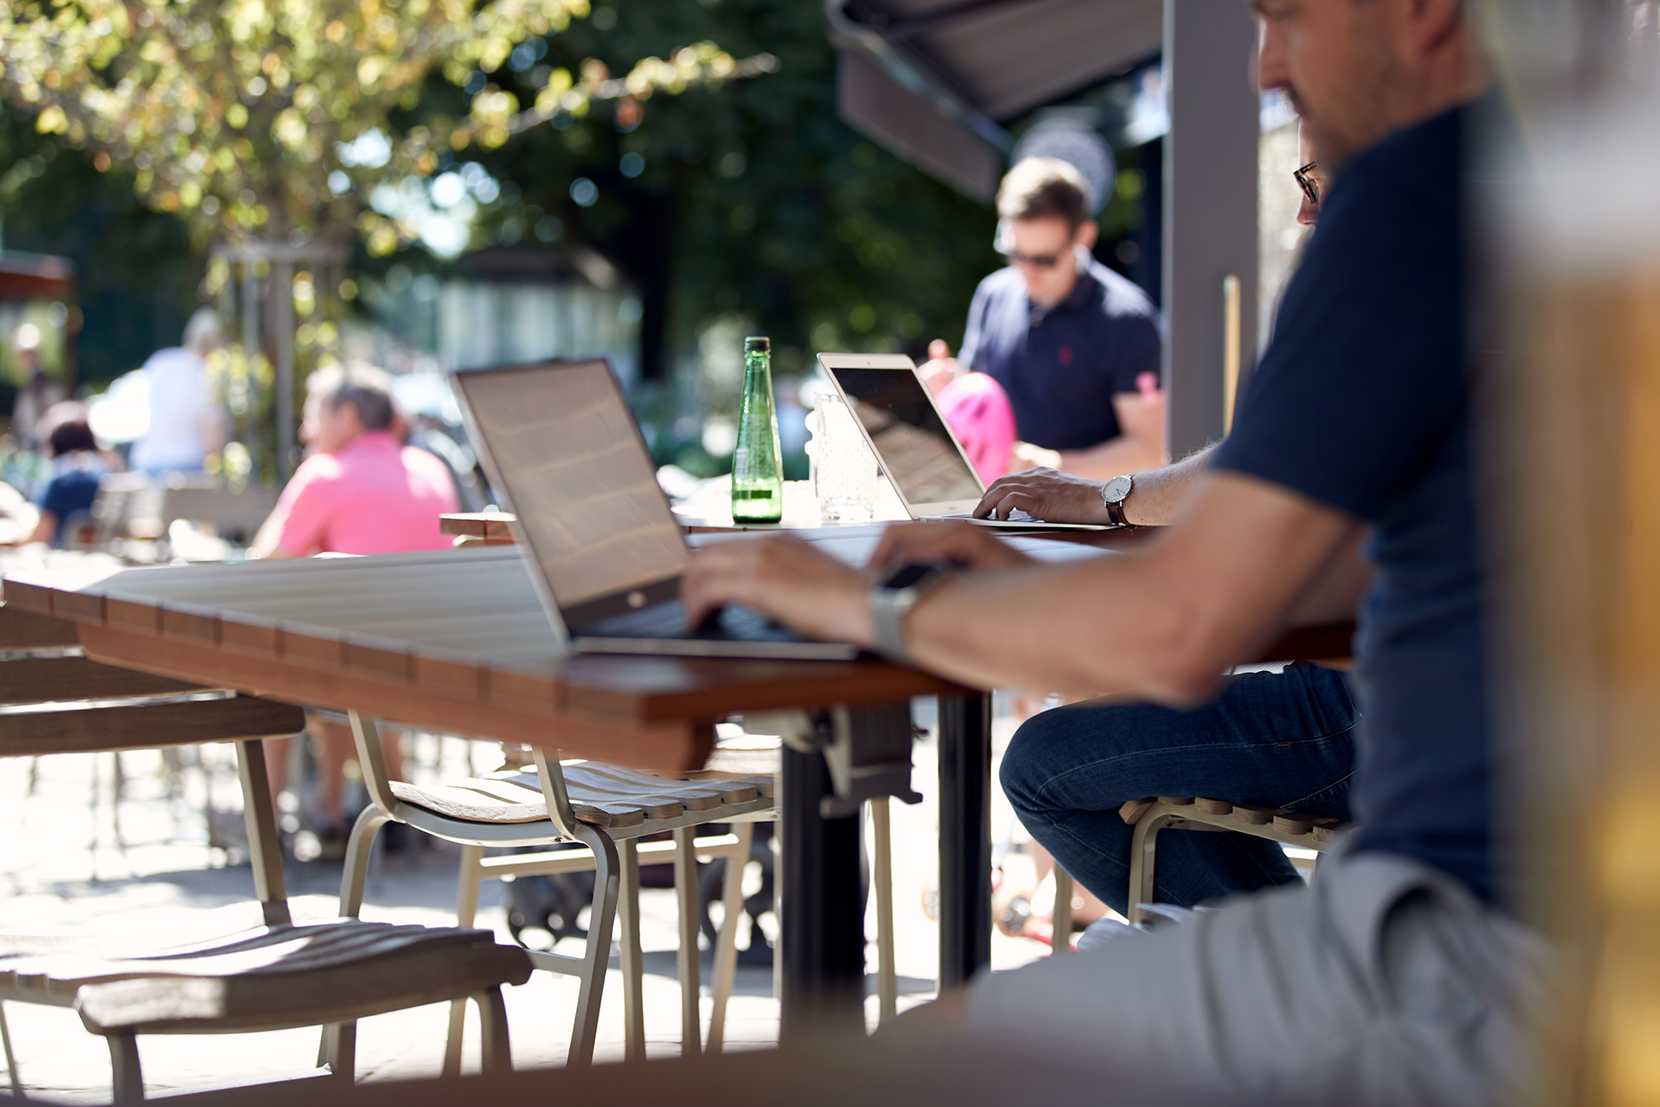 Two men are hard at work on their laptops, working while others enjoy a drink in the sun outside.